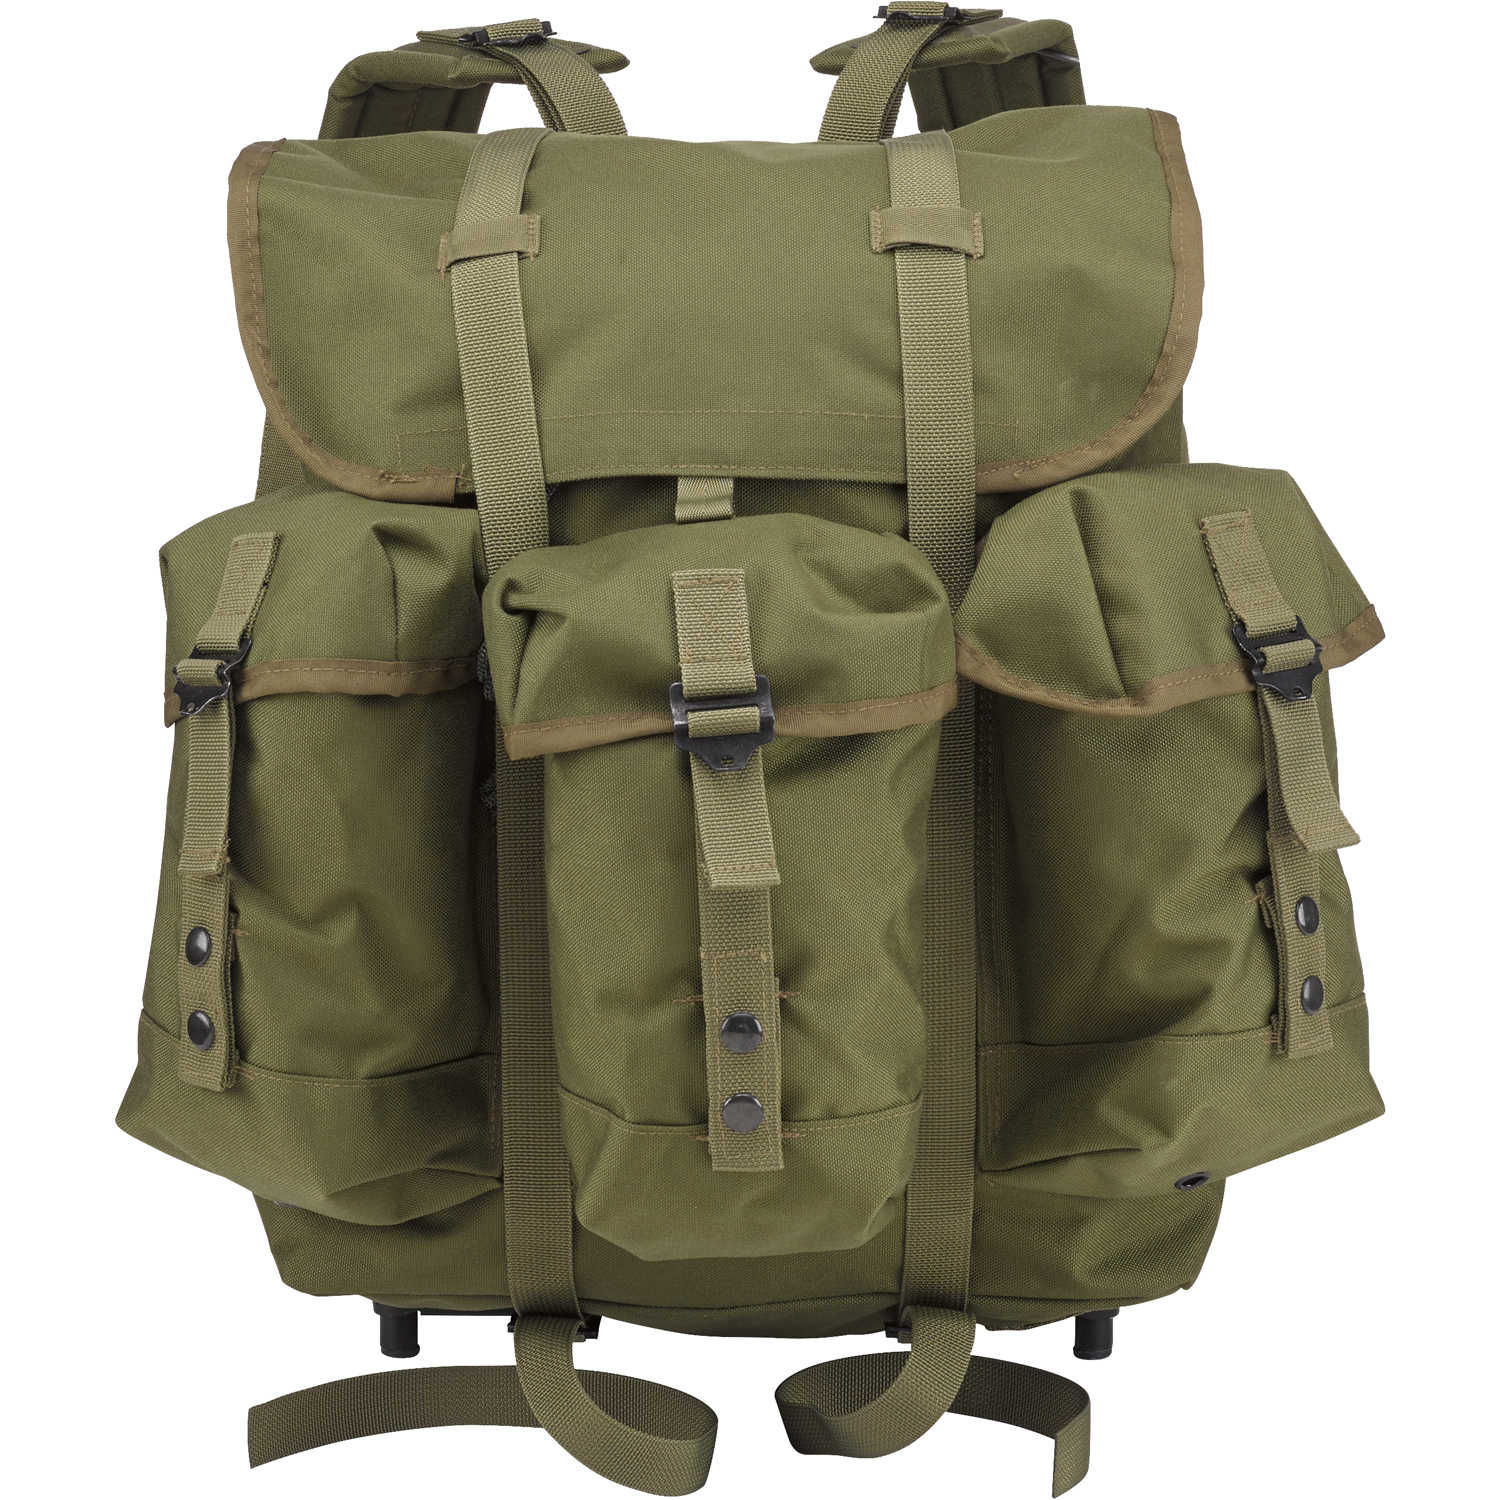 GI ALICE Packs | Forestry Suppliers, Inc.